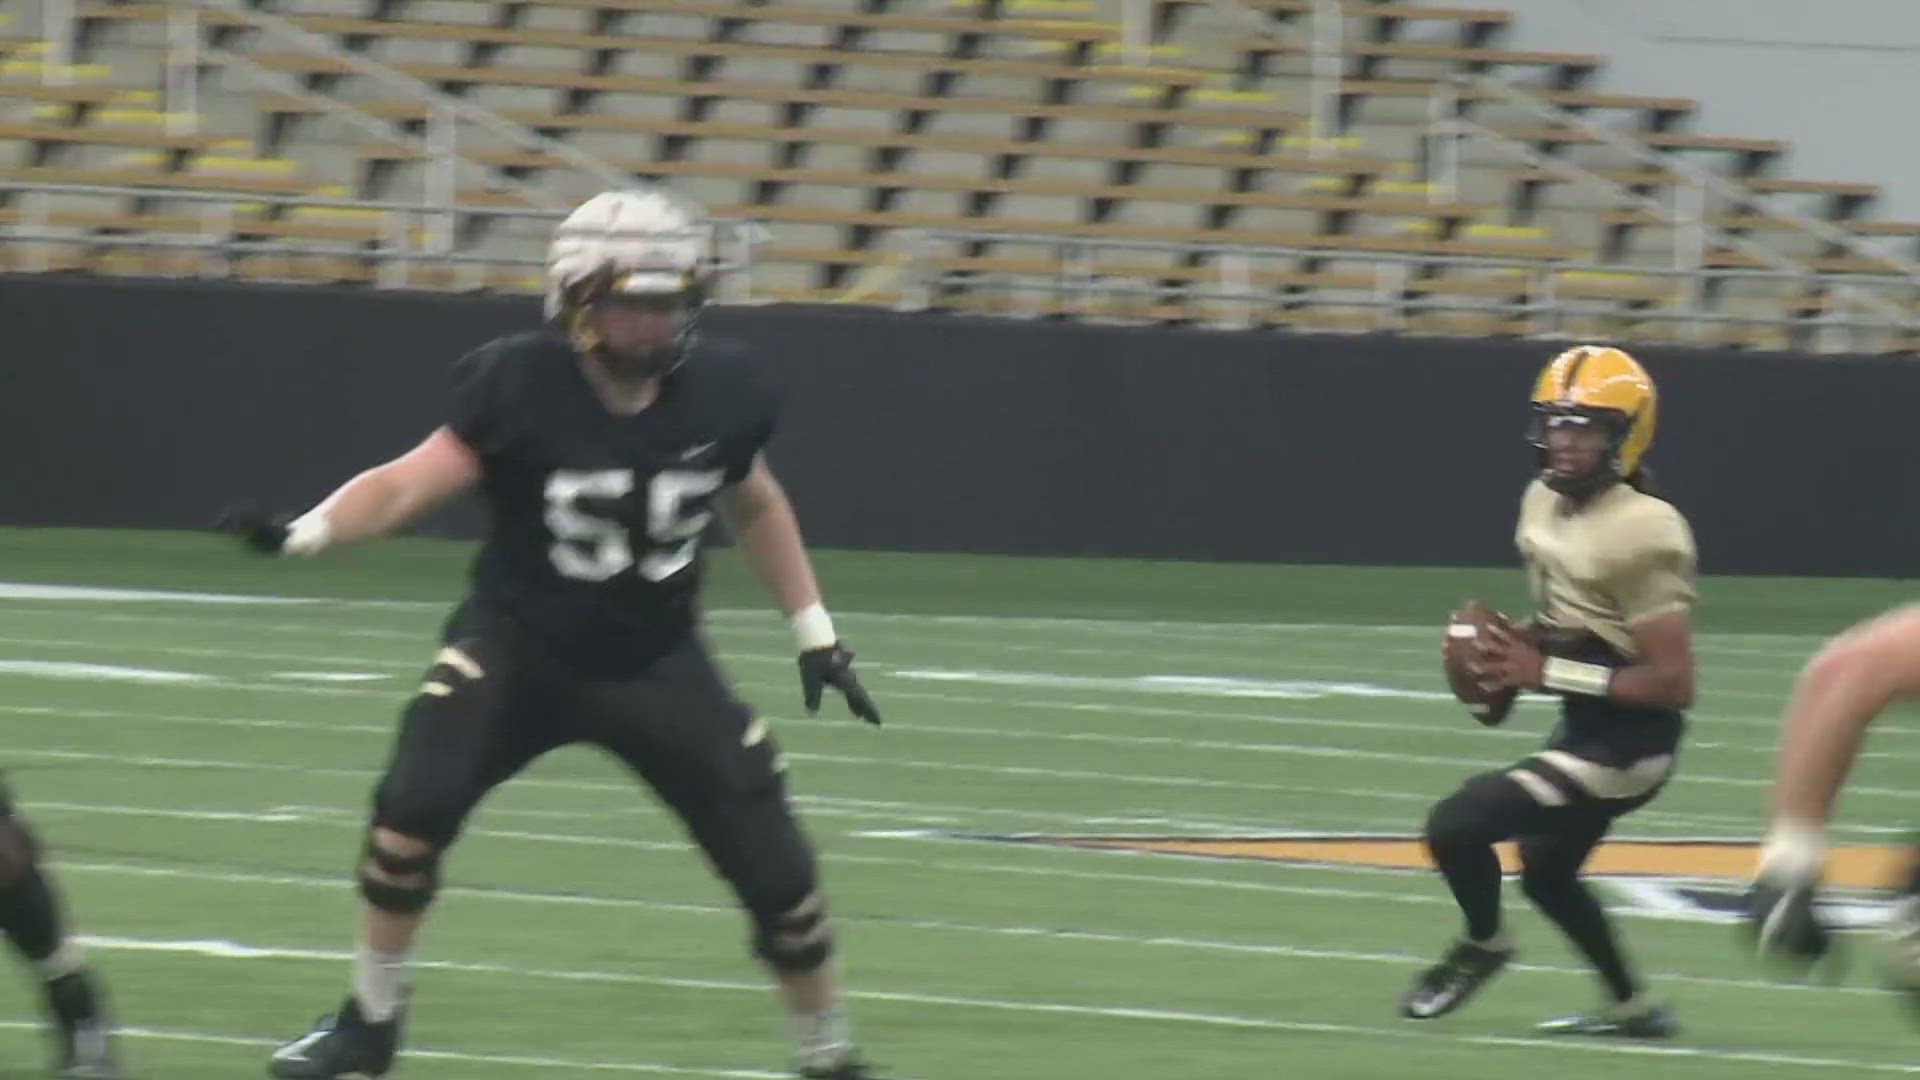 Idaho is looking to improve to 3-0 for the first time since 1994.